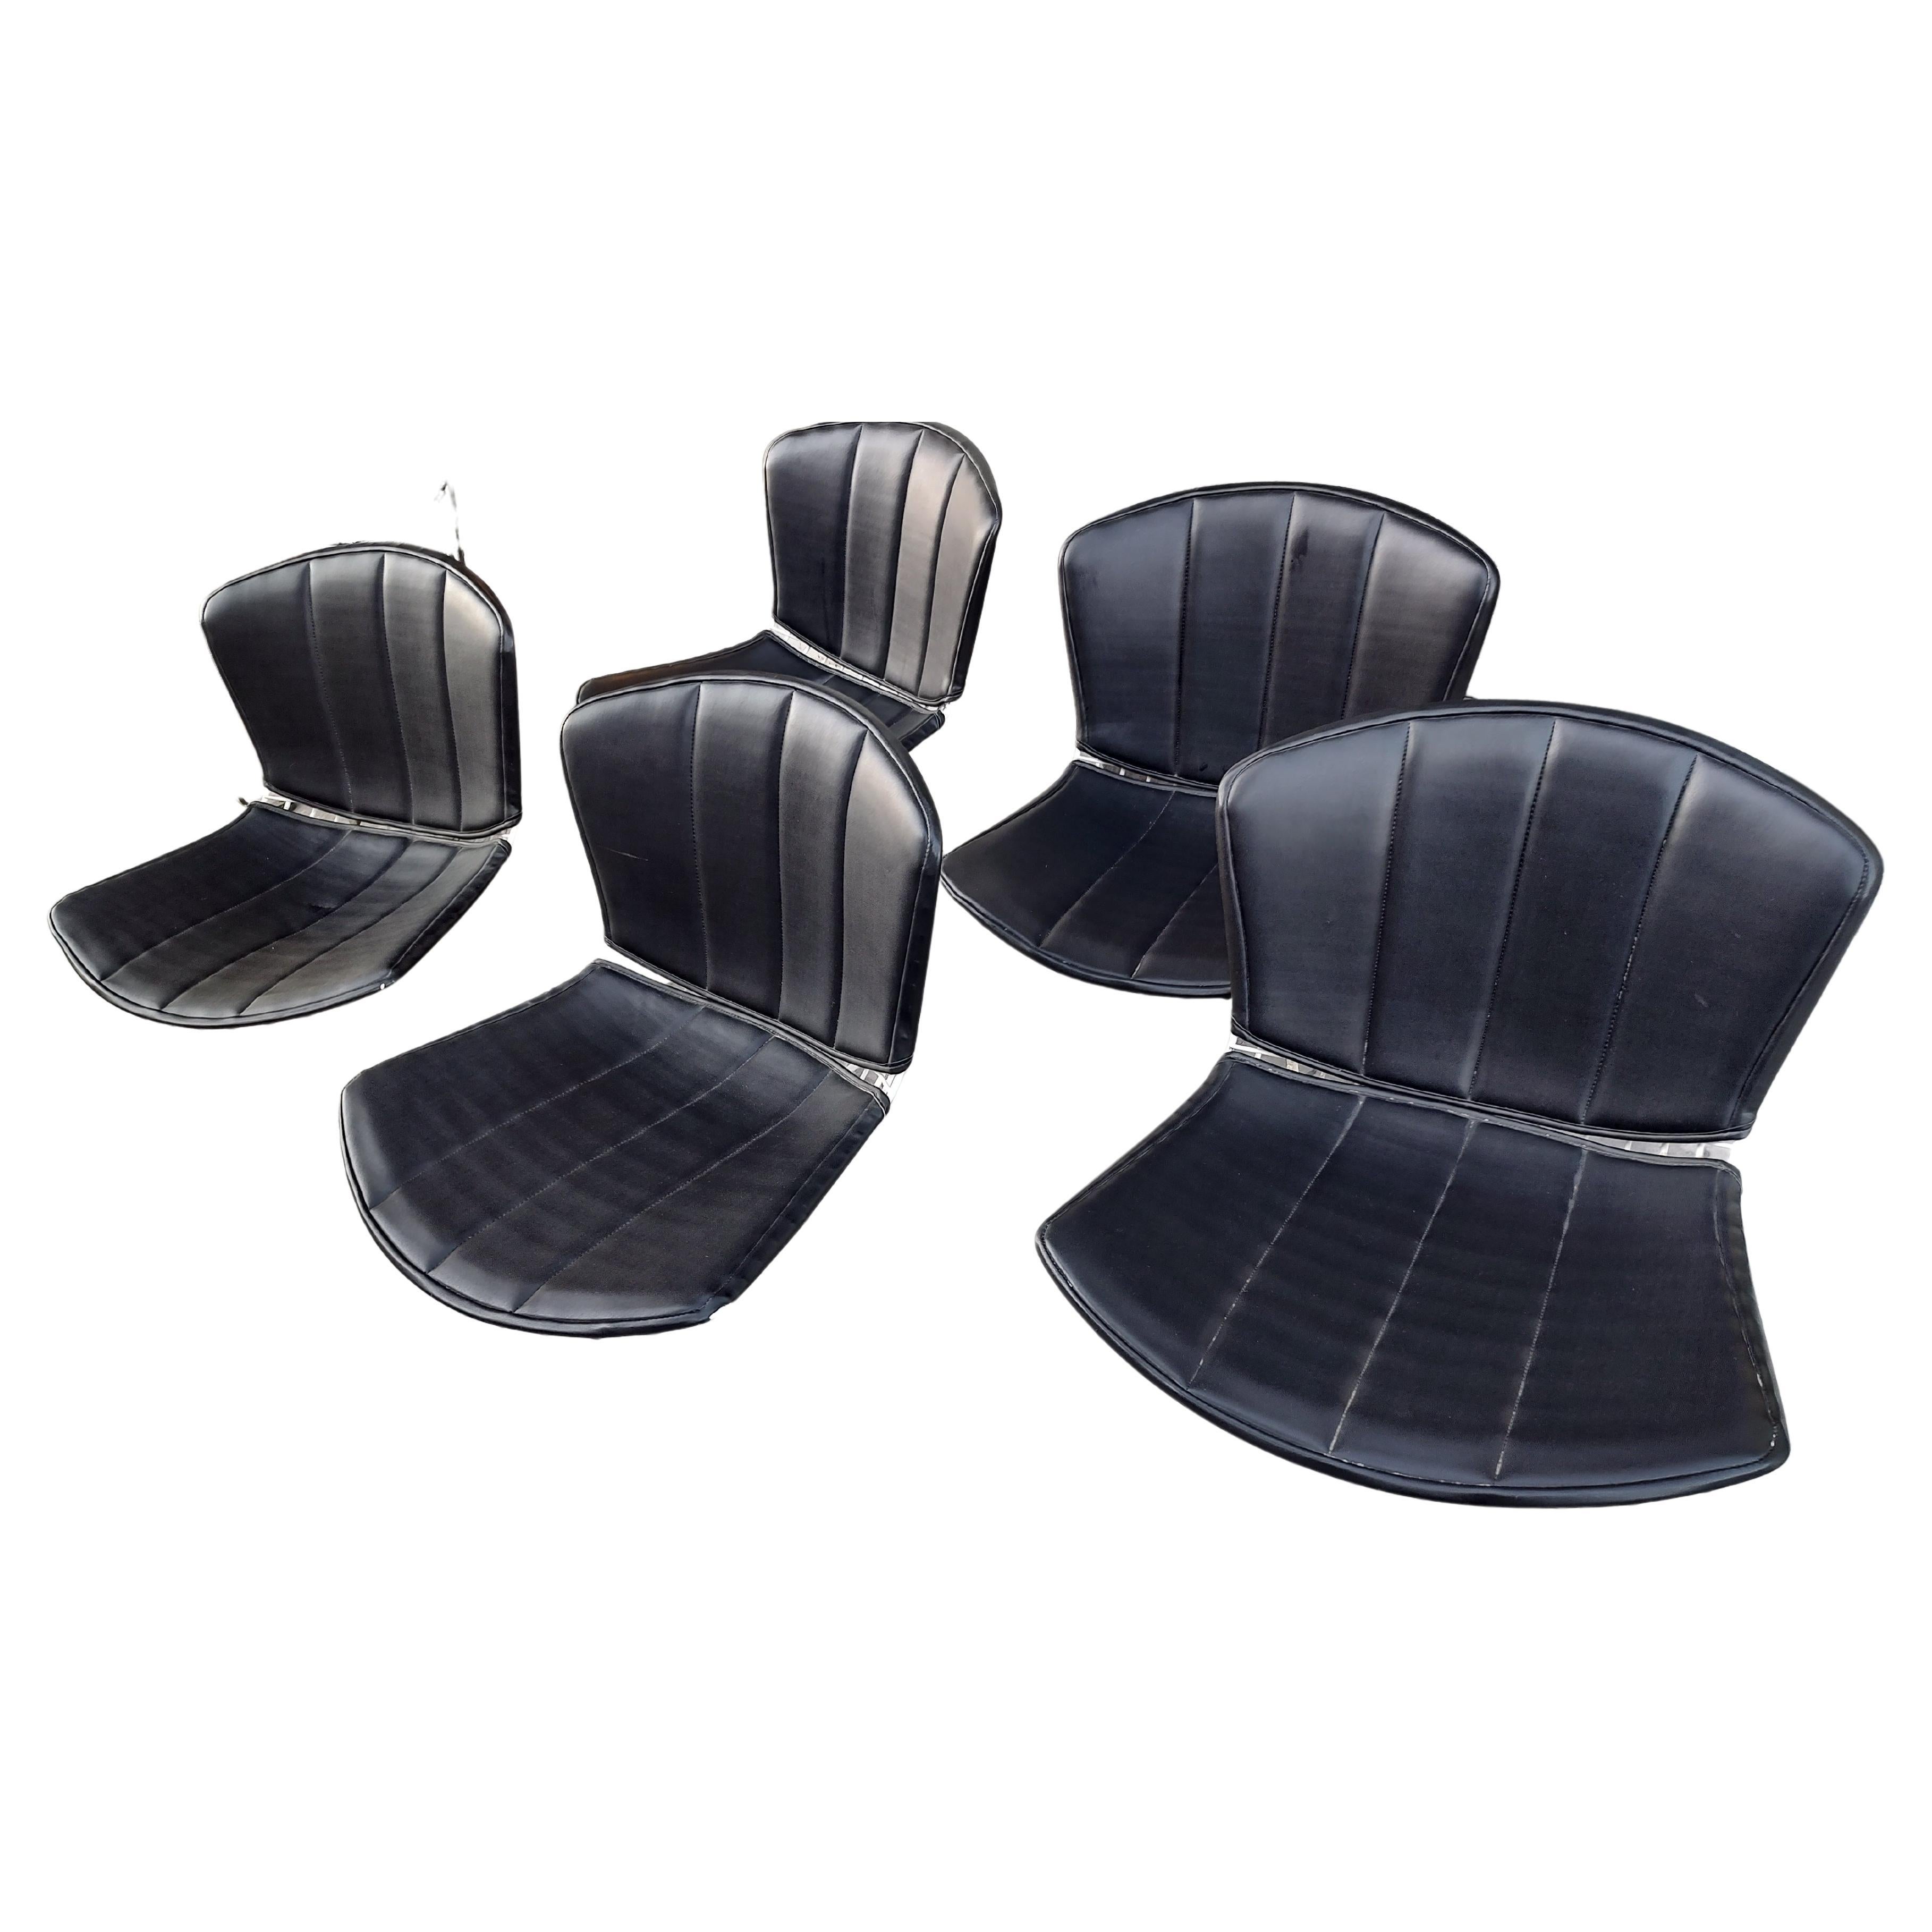 Timeless and fabulous design by Harry Bertoia for Knoll International. Set of 3 classic beauties with full leather pads for seats and backs. All labeled and in very good condition with minimal wear. Some wear to corners of the leather but at a